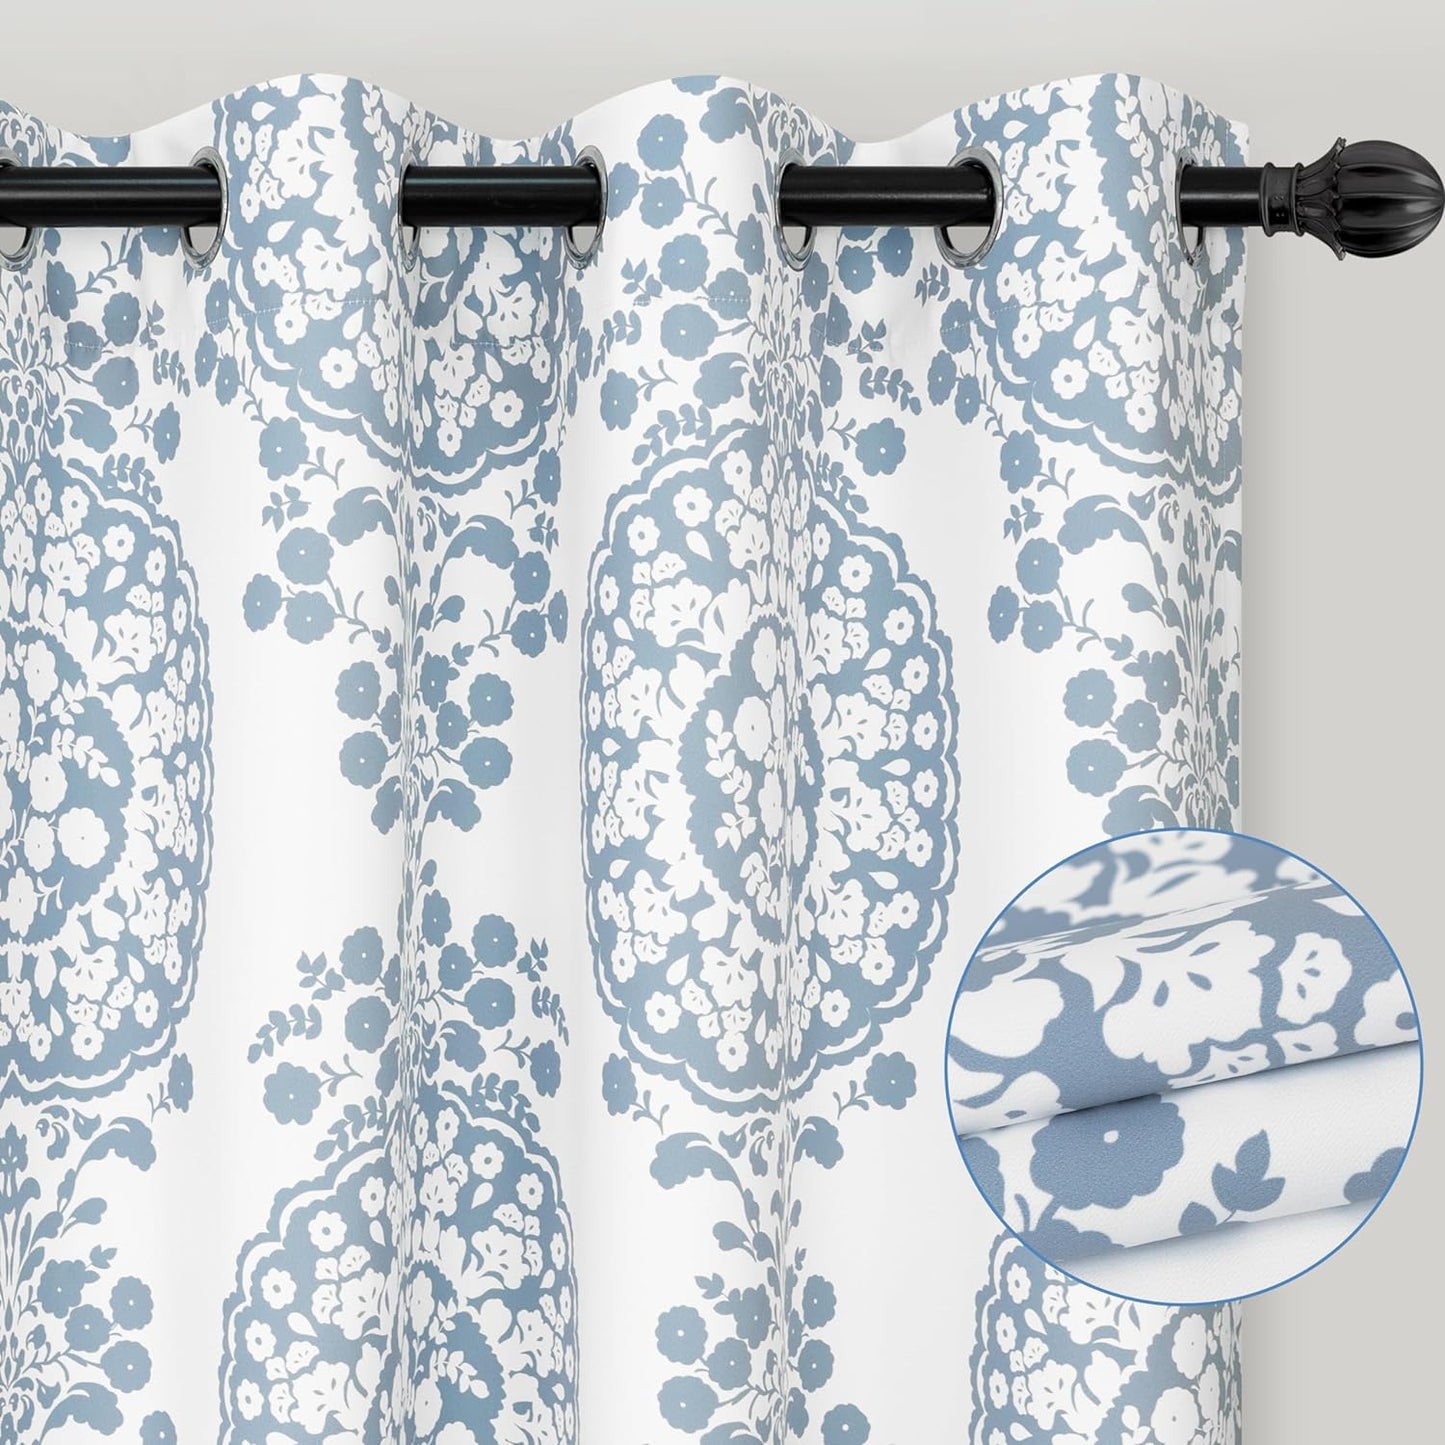 Driftaway Damask Curtains for Kitchen Bathroom Laundry Room Small Windows Floral Damask Medallion Patterned Adjustable Tie up Curtain Single 45 Inch by 63 Inch Dusty Blue  DriftAway Blue 50"X96"︱1 Panel 